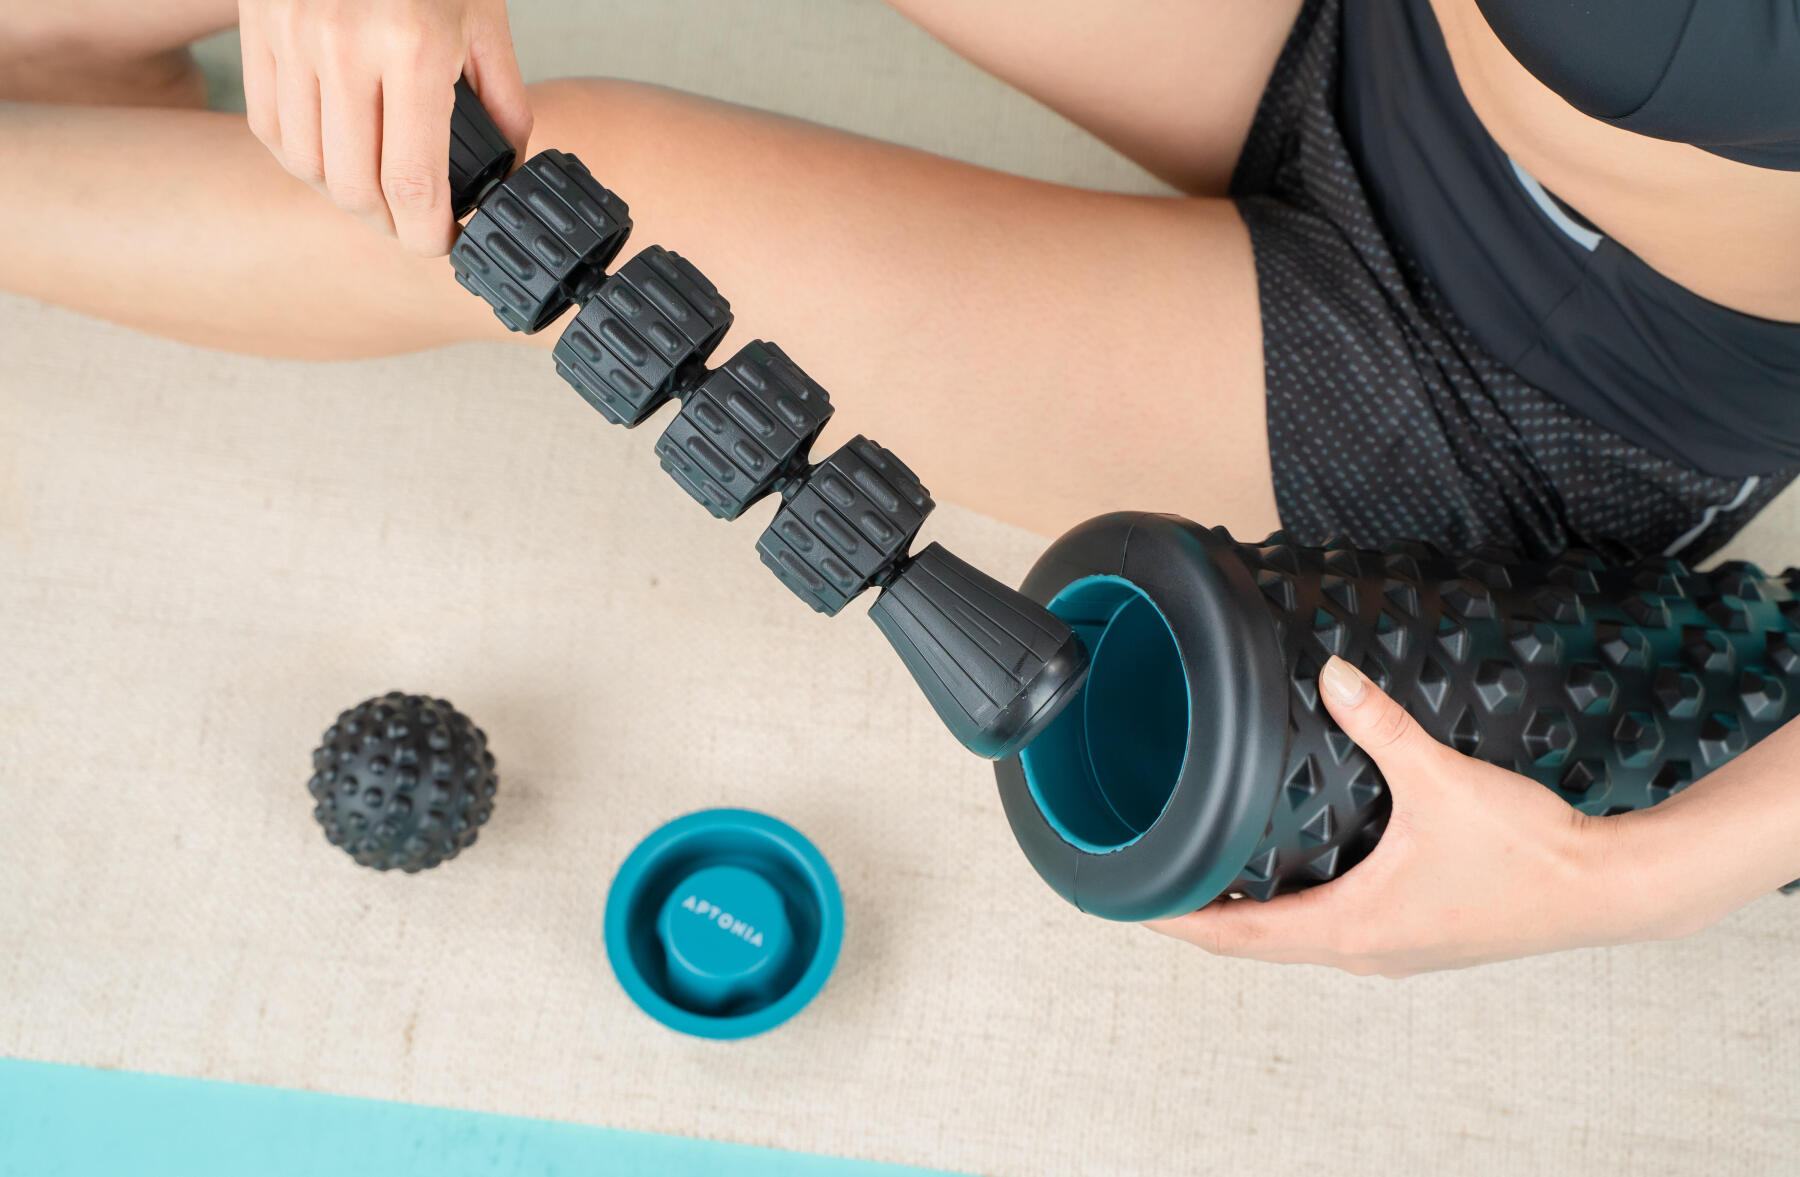 RECOVERY | HOW TO USE THE MASSAGE ROLLERS, BALLS AND STICKS ?